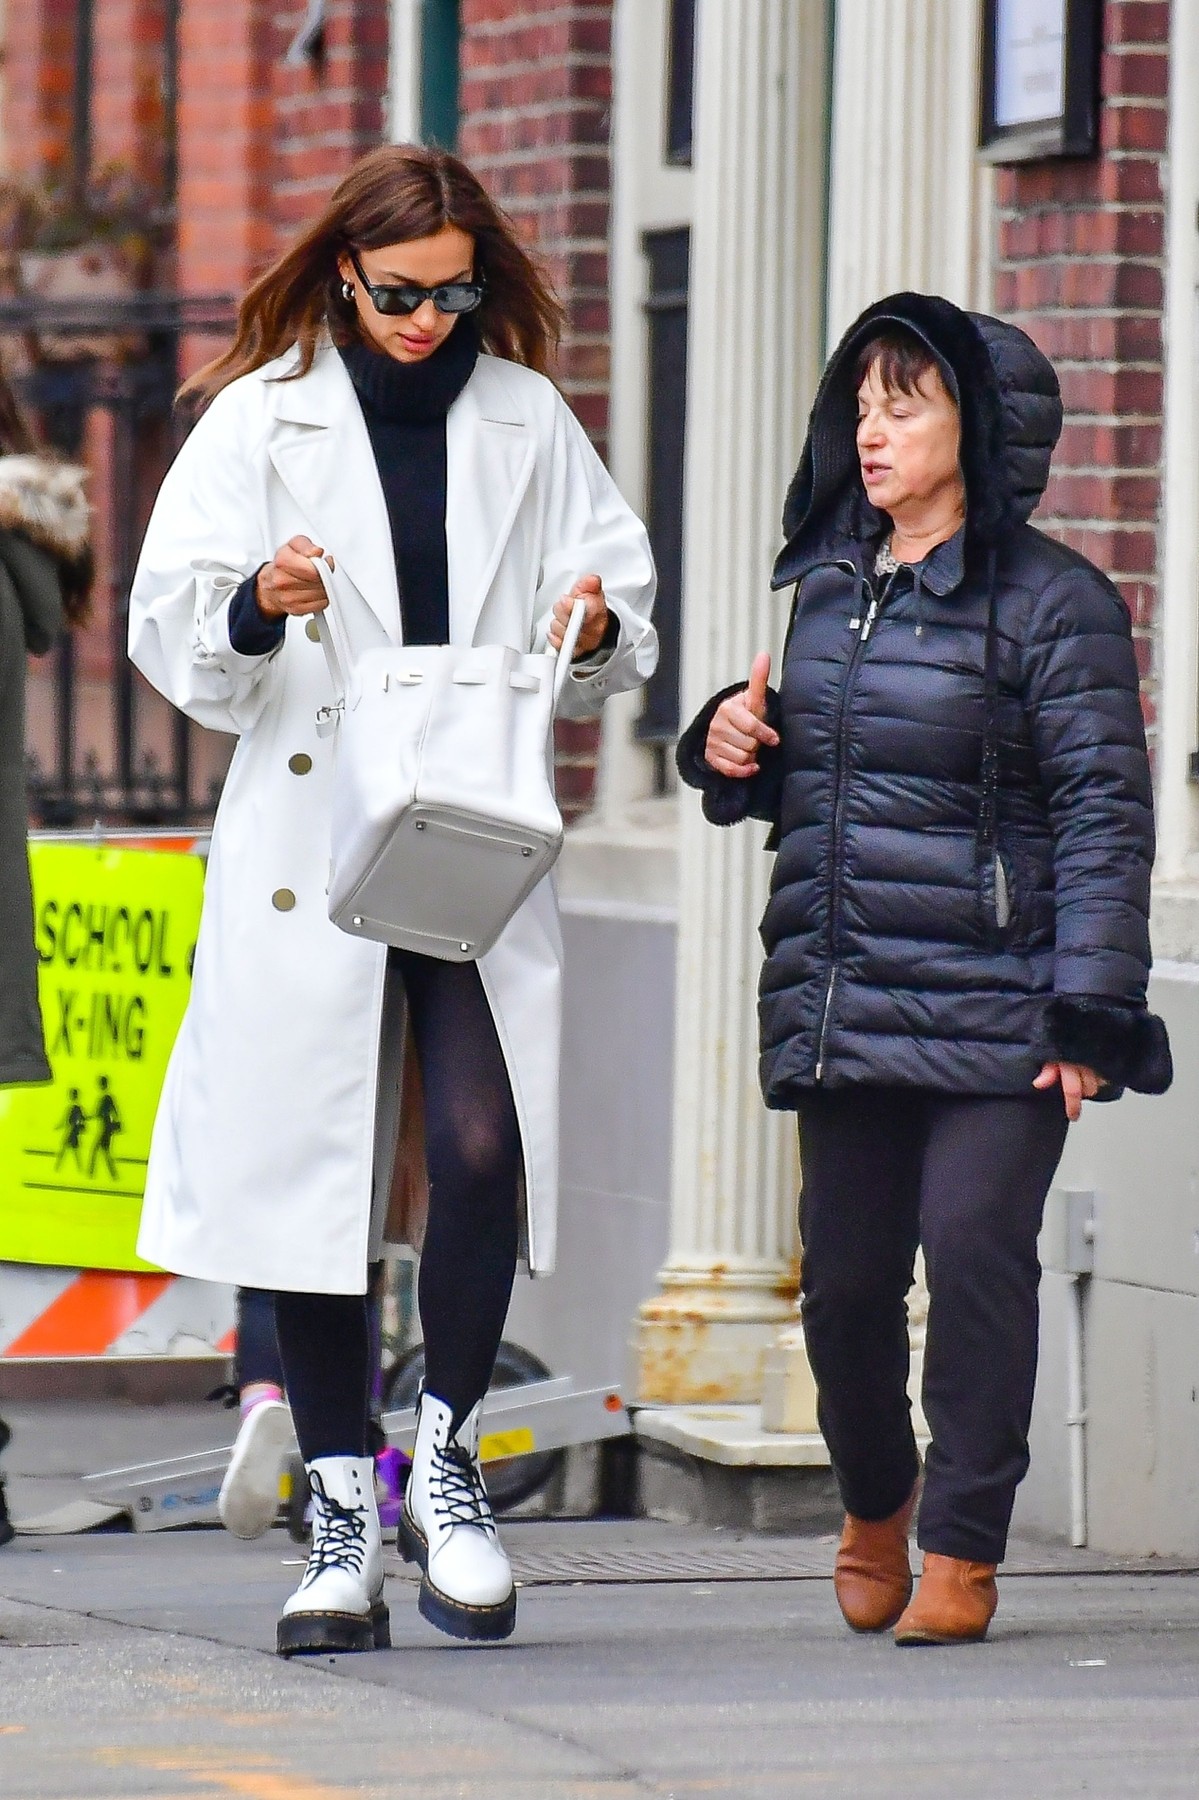 New York, Ny  - *EXCLUSIVE*  - Irina Shayk looks happy while shopping with her mother Olga Shaykhlislamova. Irina stands out in a large white trench coat, black turtleneck, black leggings, and white and black boots.

BACKGRID USA 27 JANUARY 2020, Image: 495080063, License: Rights-managed, Restrictions: RIGHTS: WORLDWIDE EXCEPT IN FRANCE, GERMANY, POLAND, Model Release: no, Credit line: Skyler2018 / BACKGRID / Backgrid USA / Profimedia